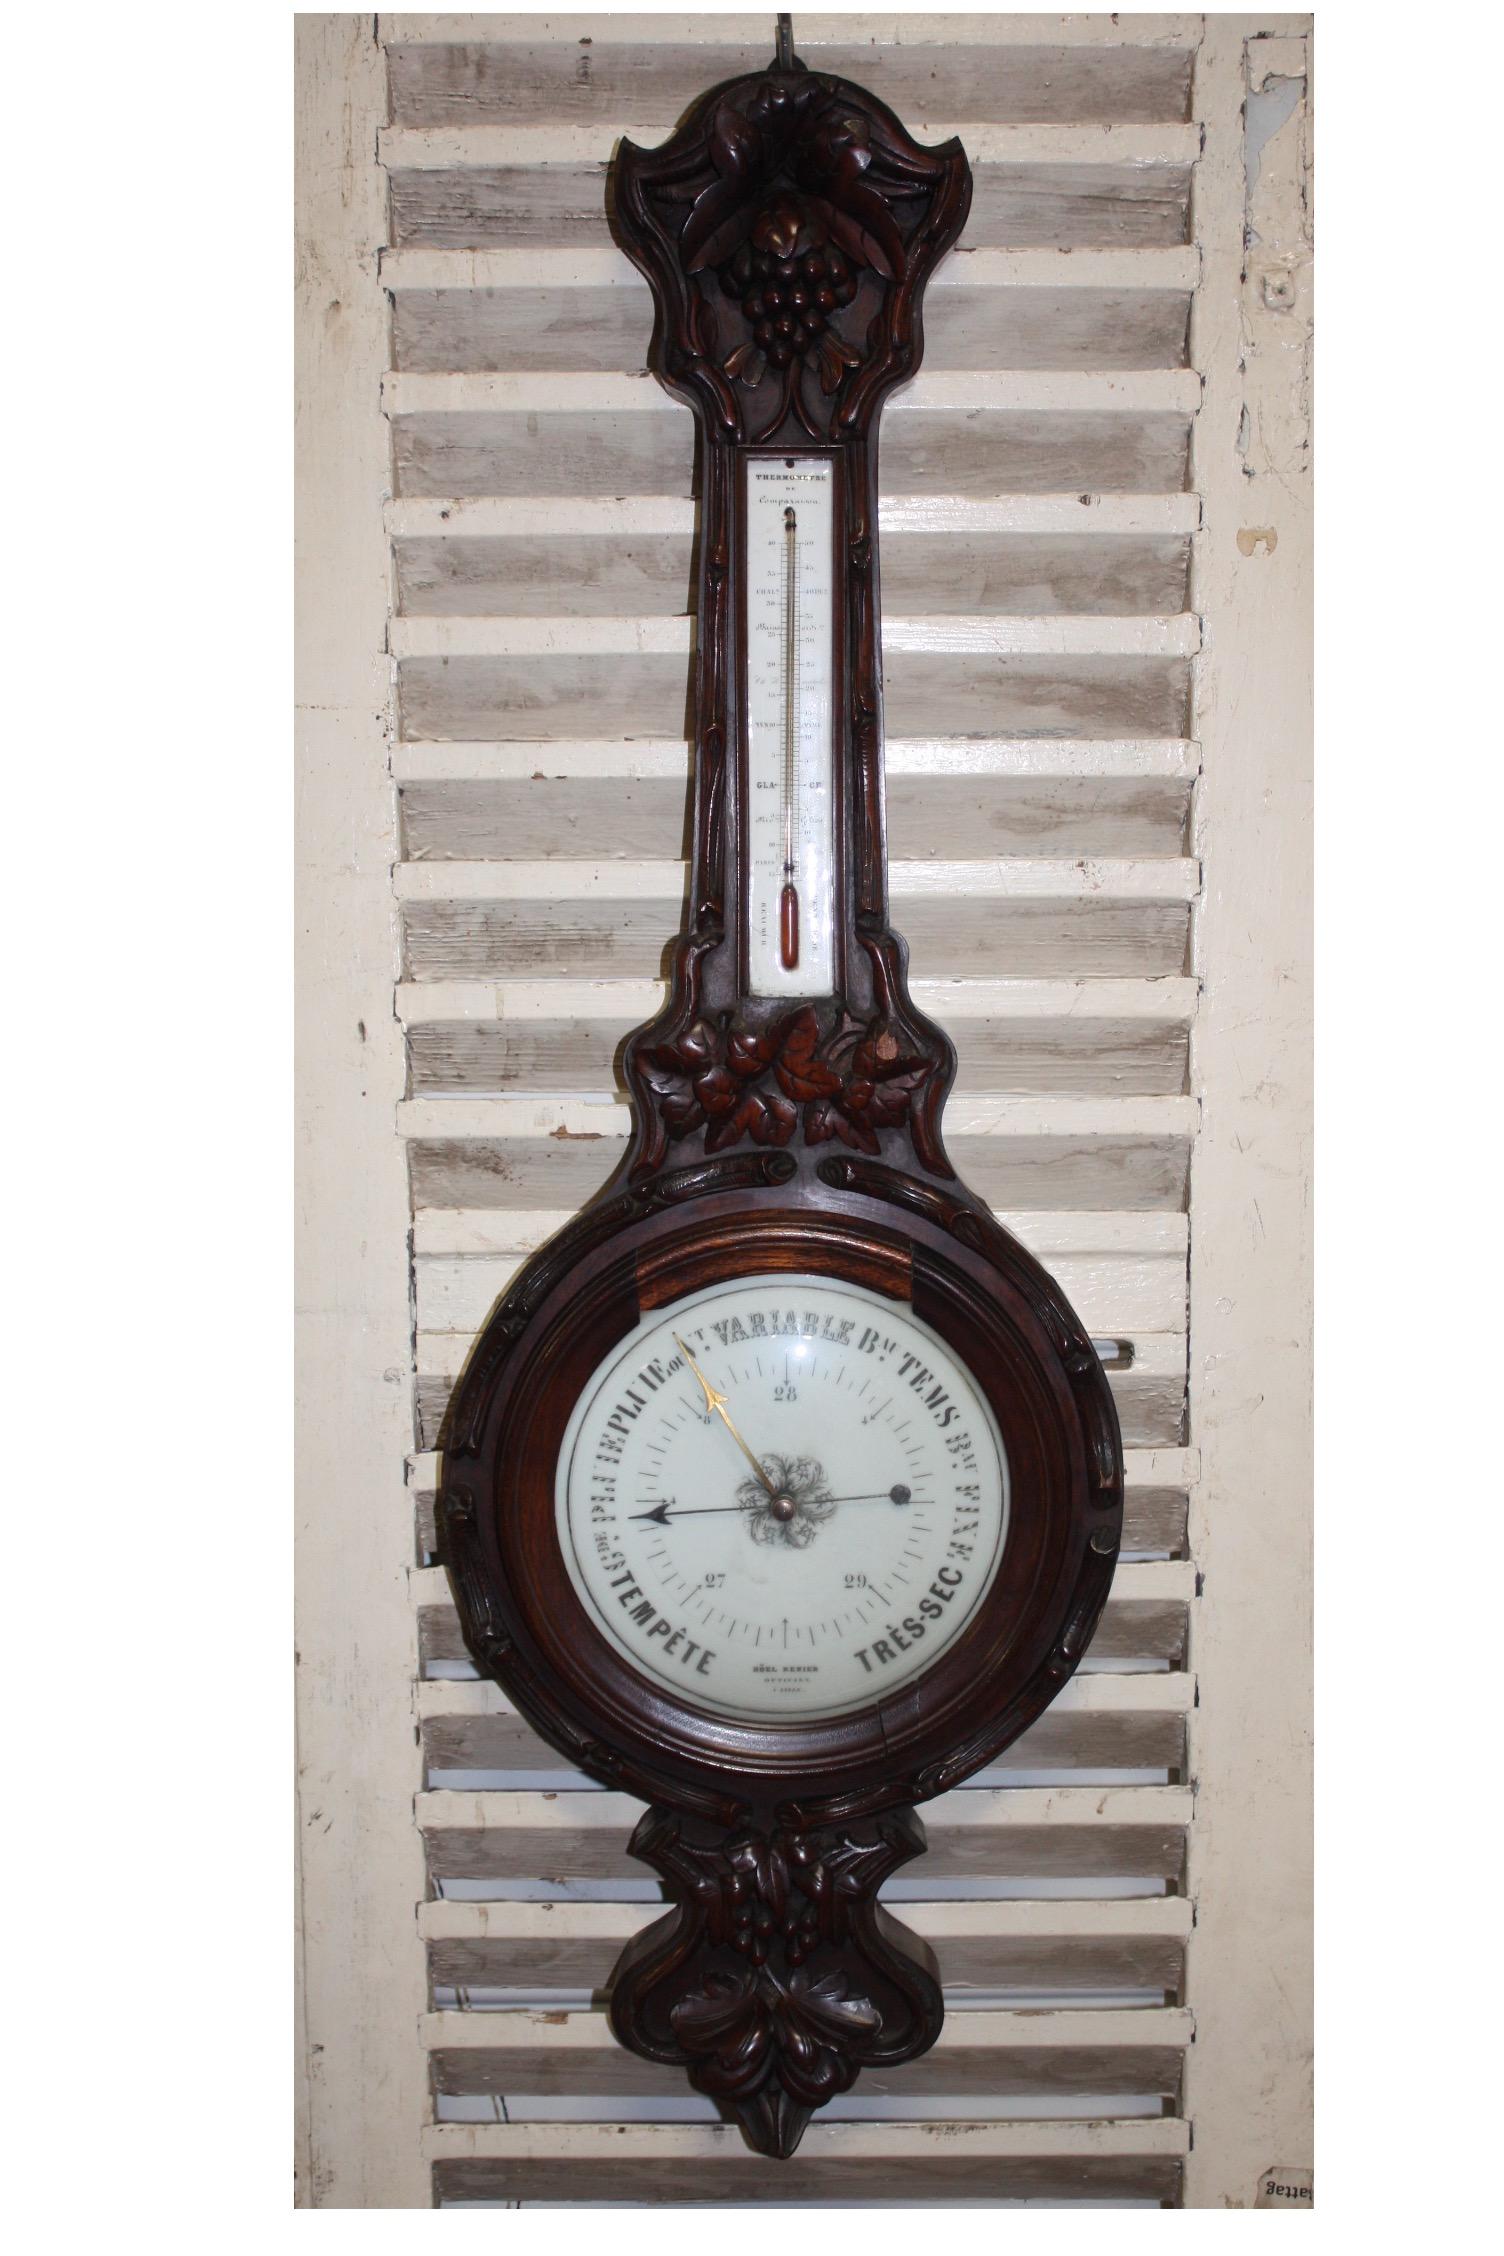 French 19th century black forest barometer.